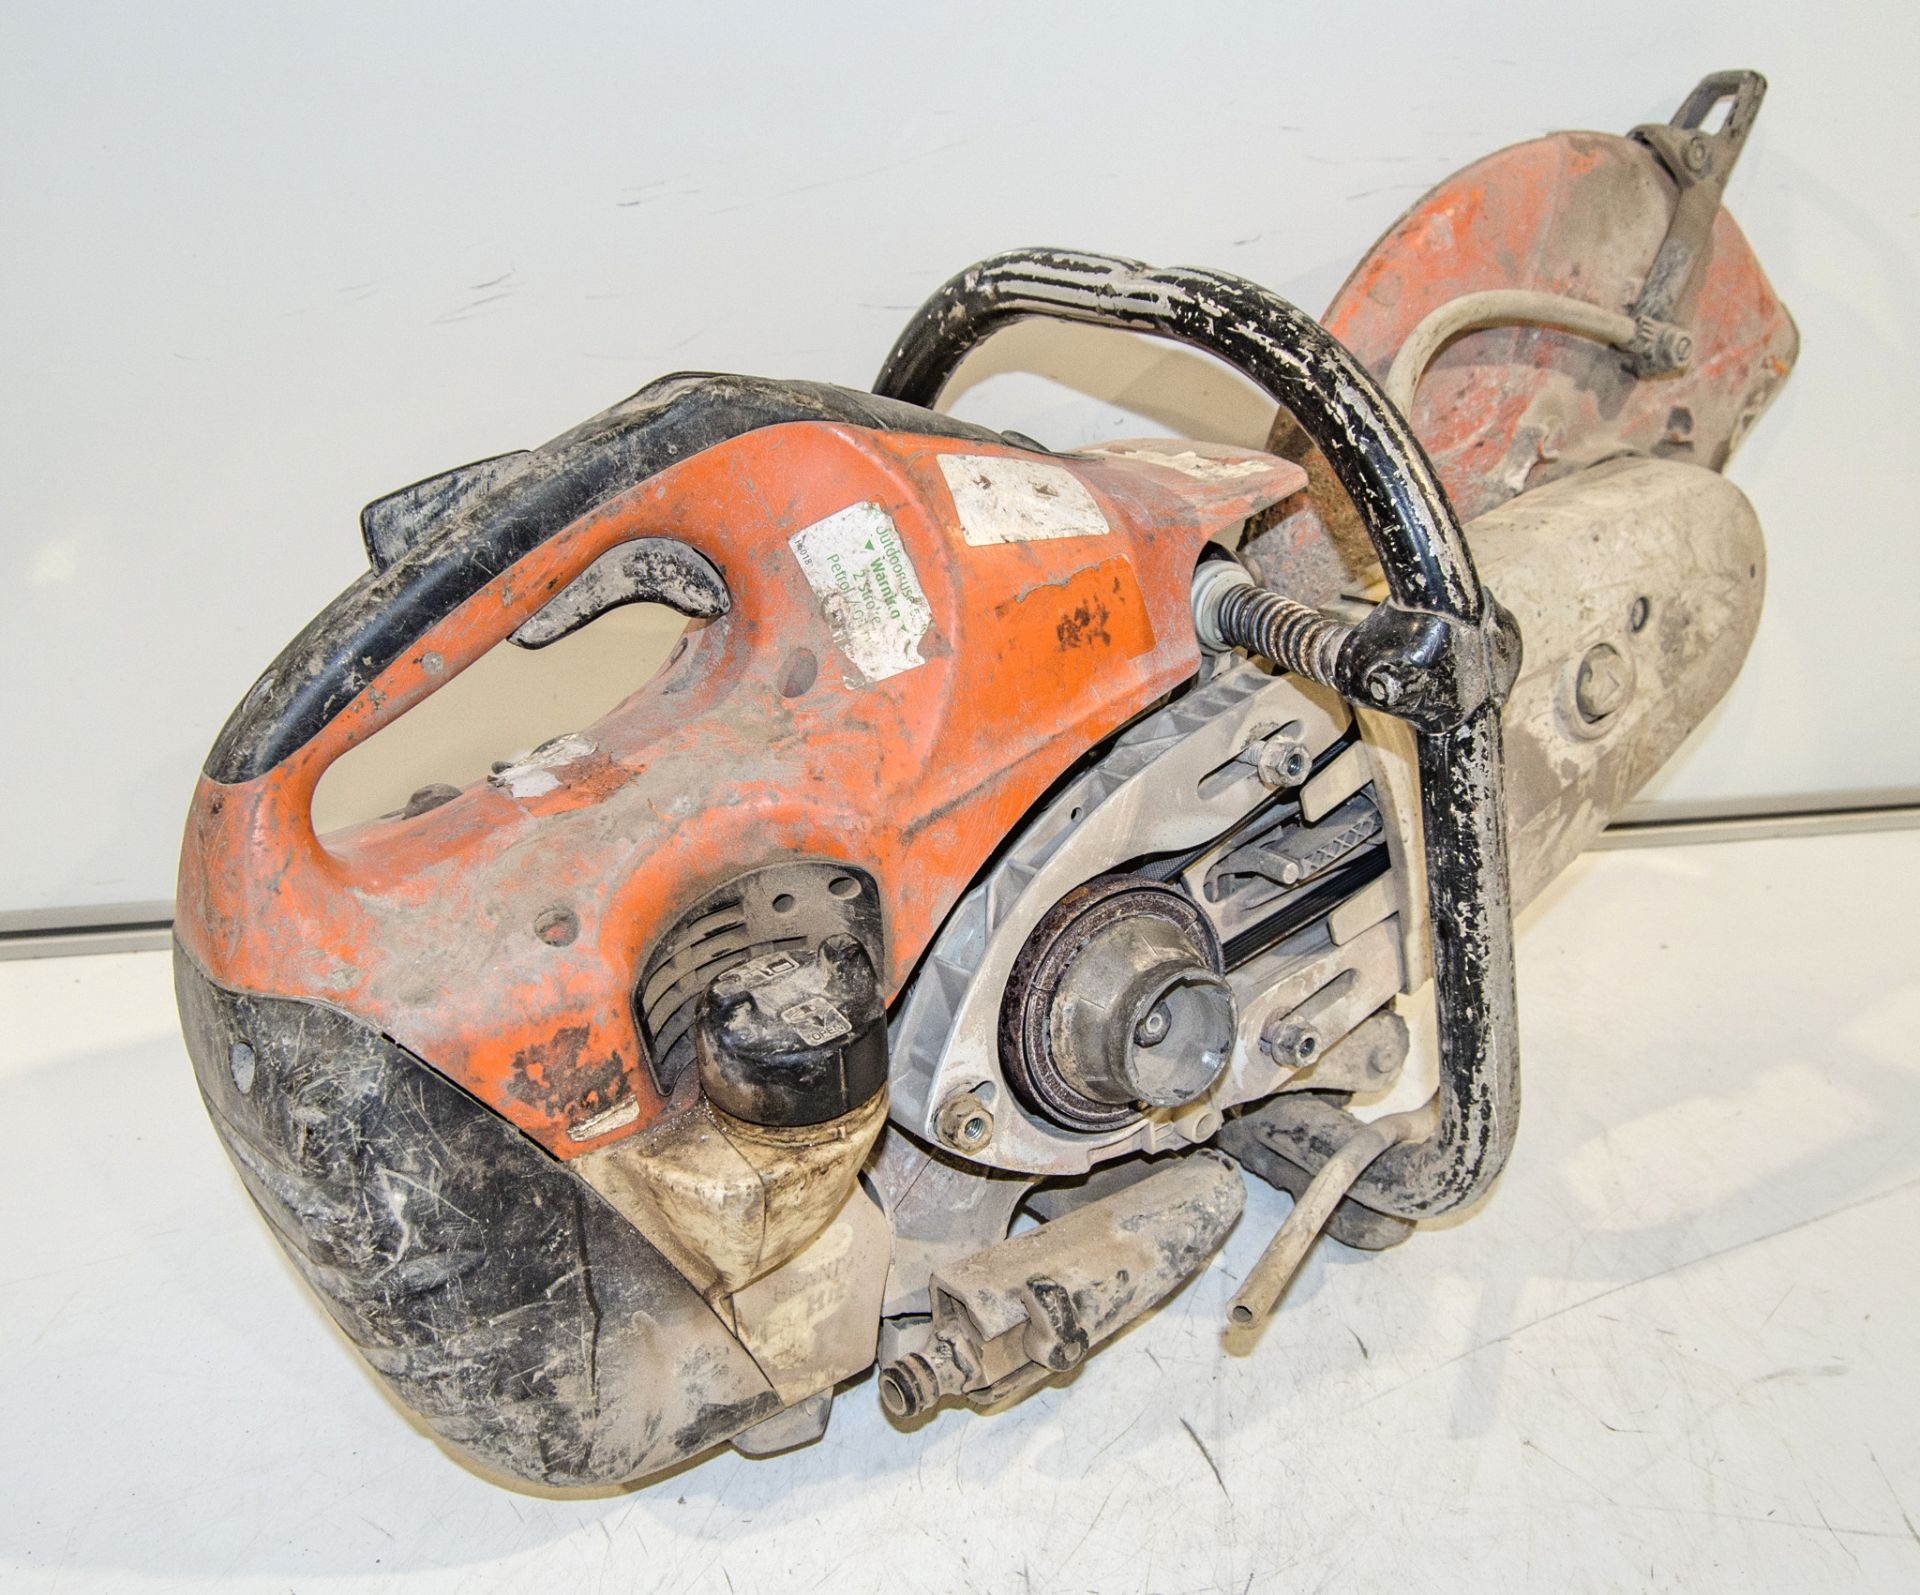 Stihl TS410 petrol driven cut off saw ** Pull cord assembly missing ** 0227C104 - Image 2 of 2